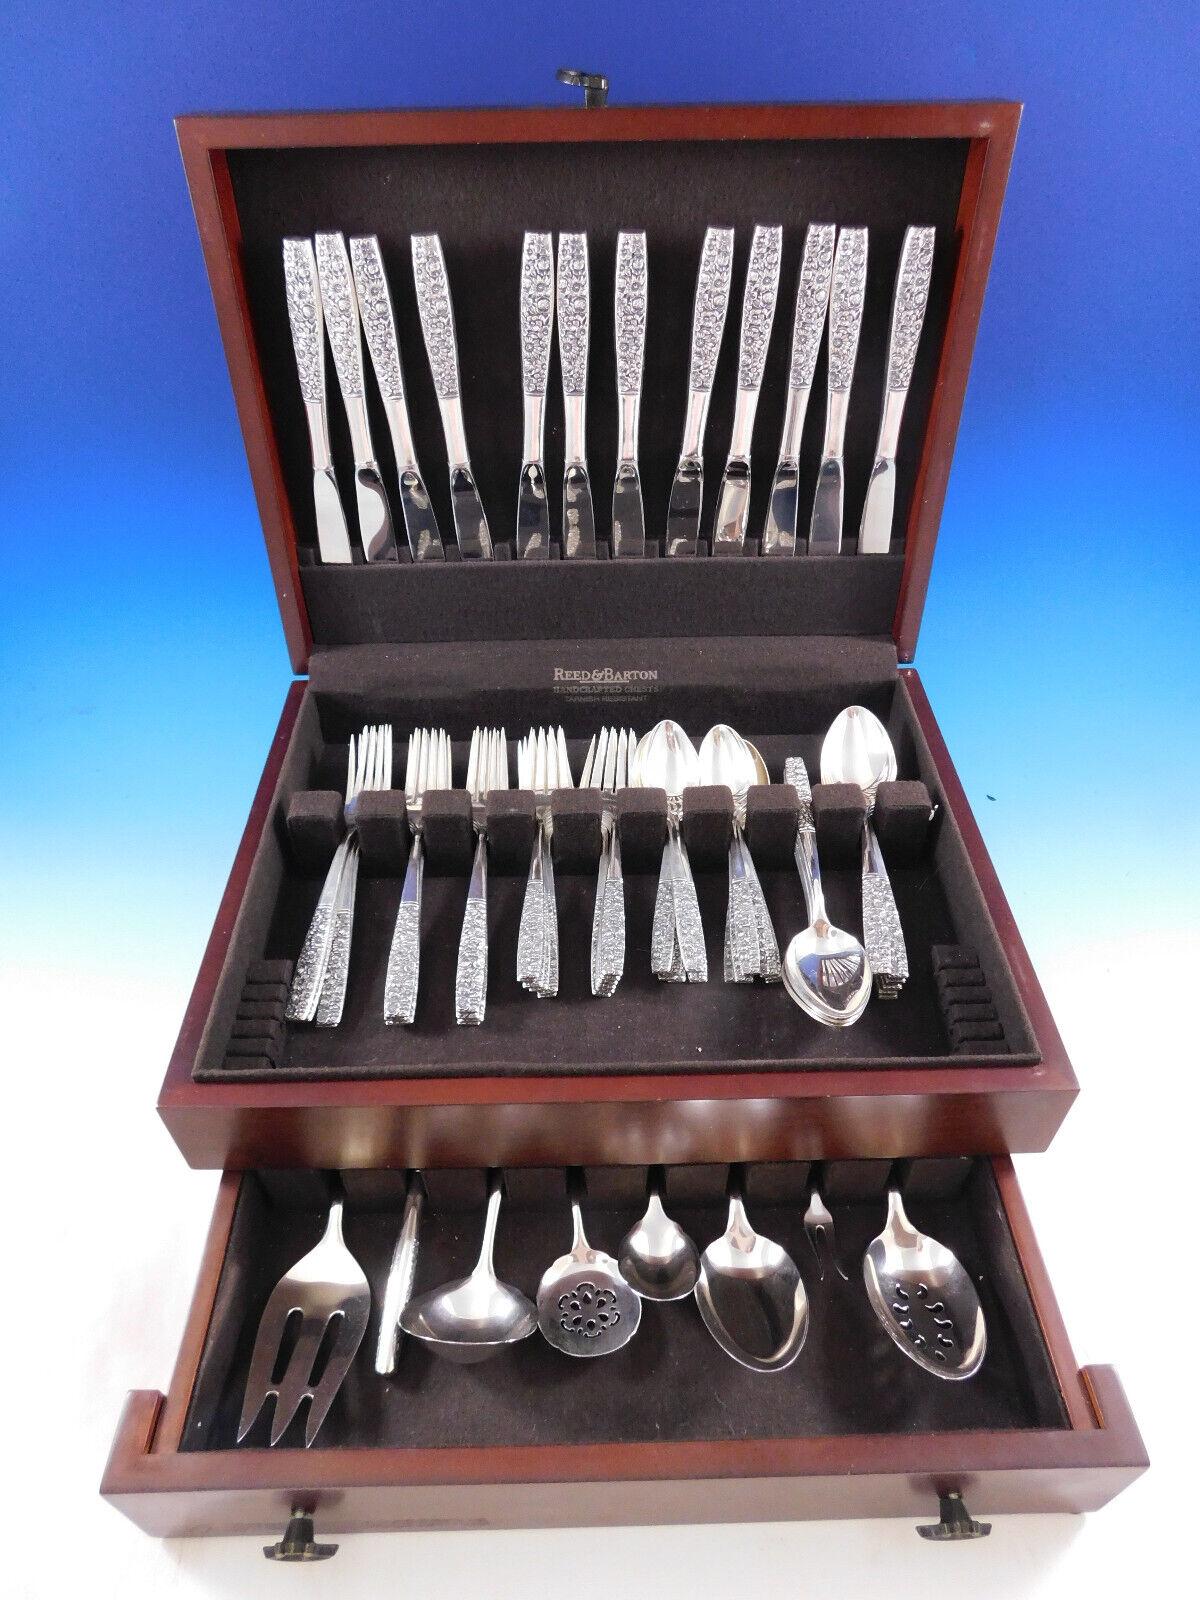 Gorgeous Contessina by Towle, circa 1965, floral repousse sterling silver flatware set - 68 Pieces. This set includes:

12 knives, 9